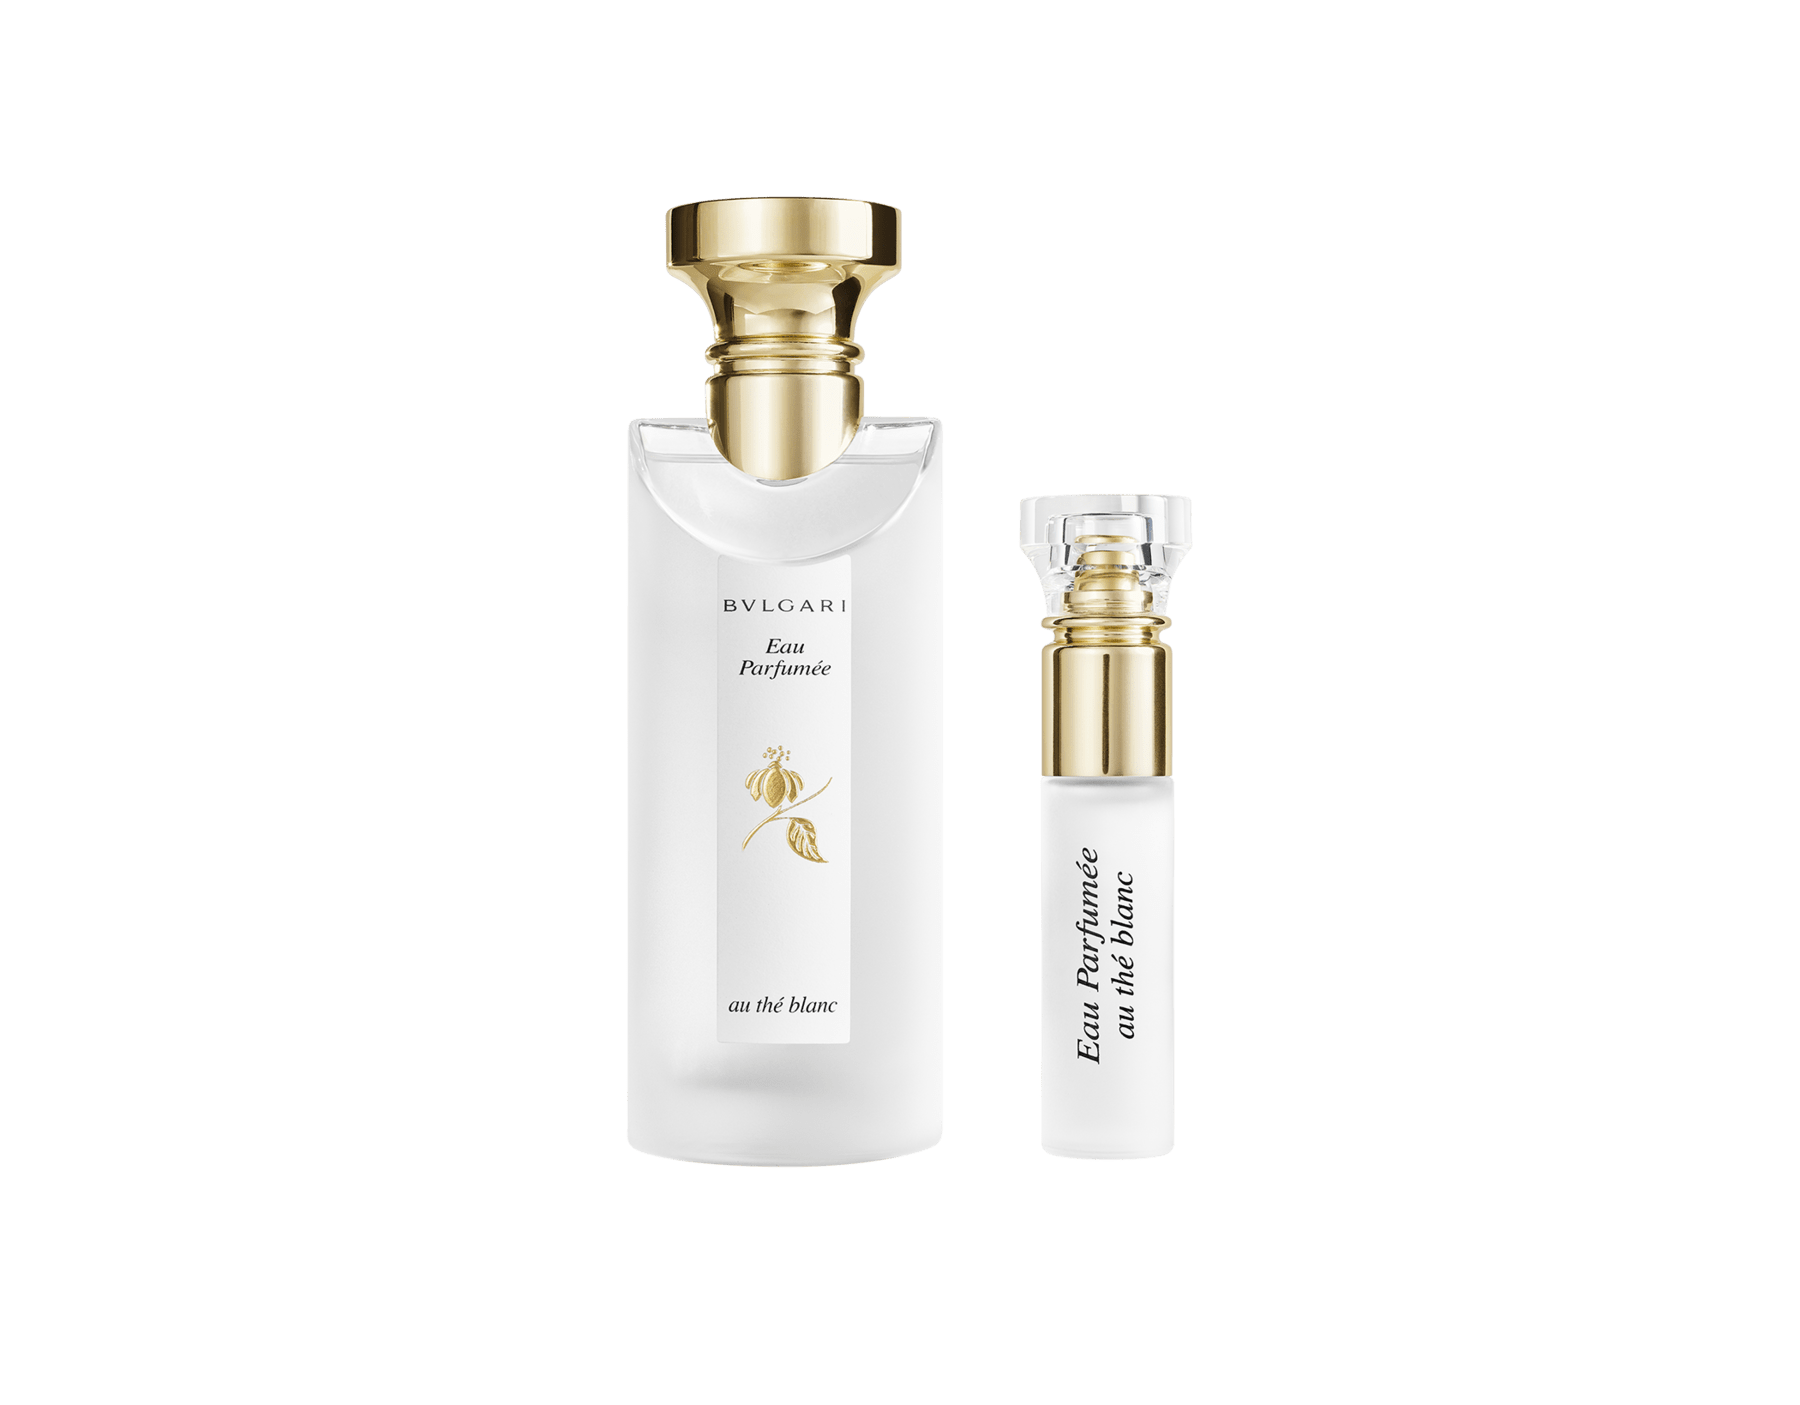 A luxurious floral eau de cologne kit for men and women inspired by rare white Himalayan Tea. 41865 image 1